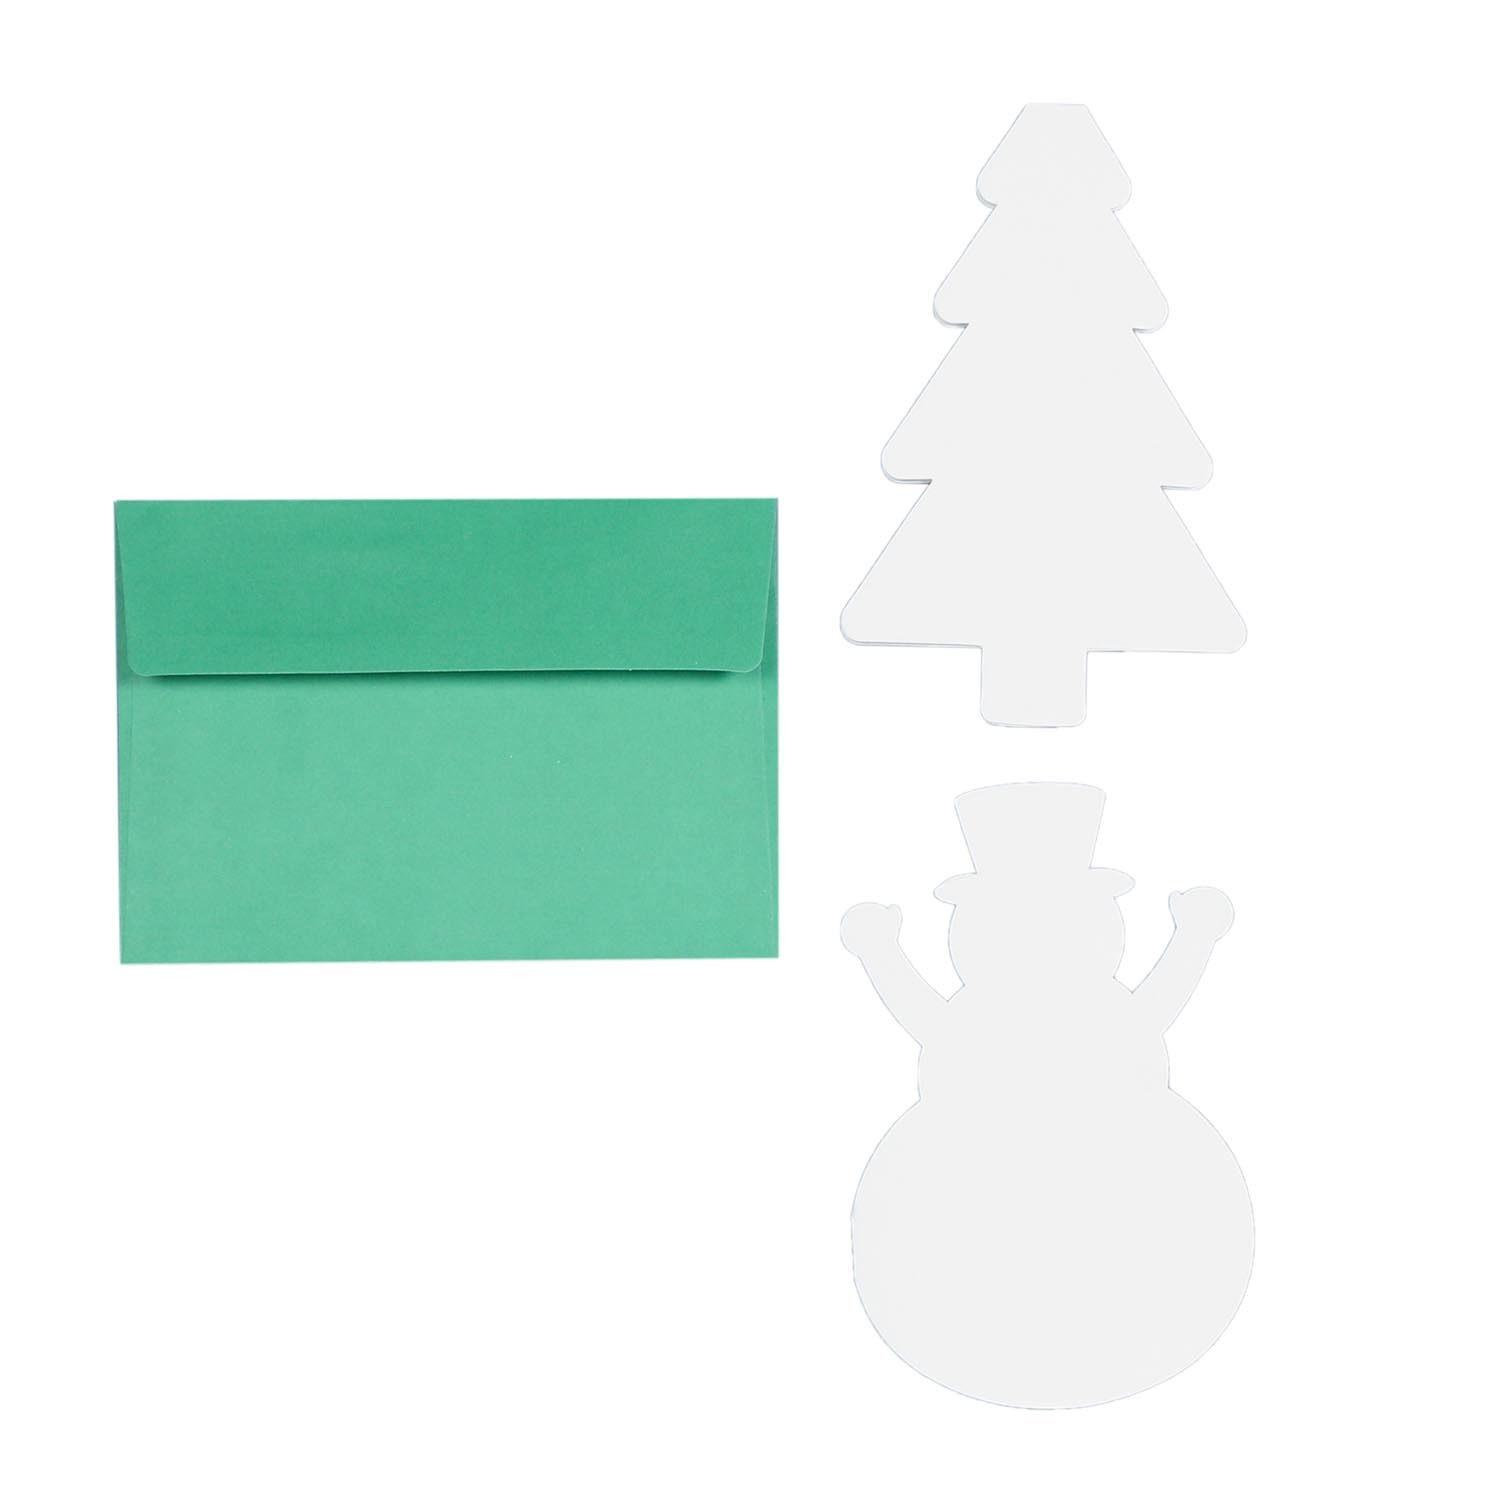 Blank Christmas Shaped Cards and Envelopes Image 2